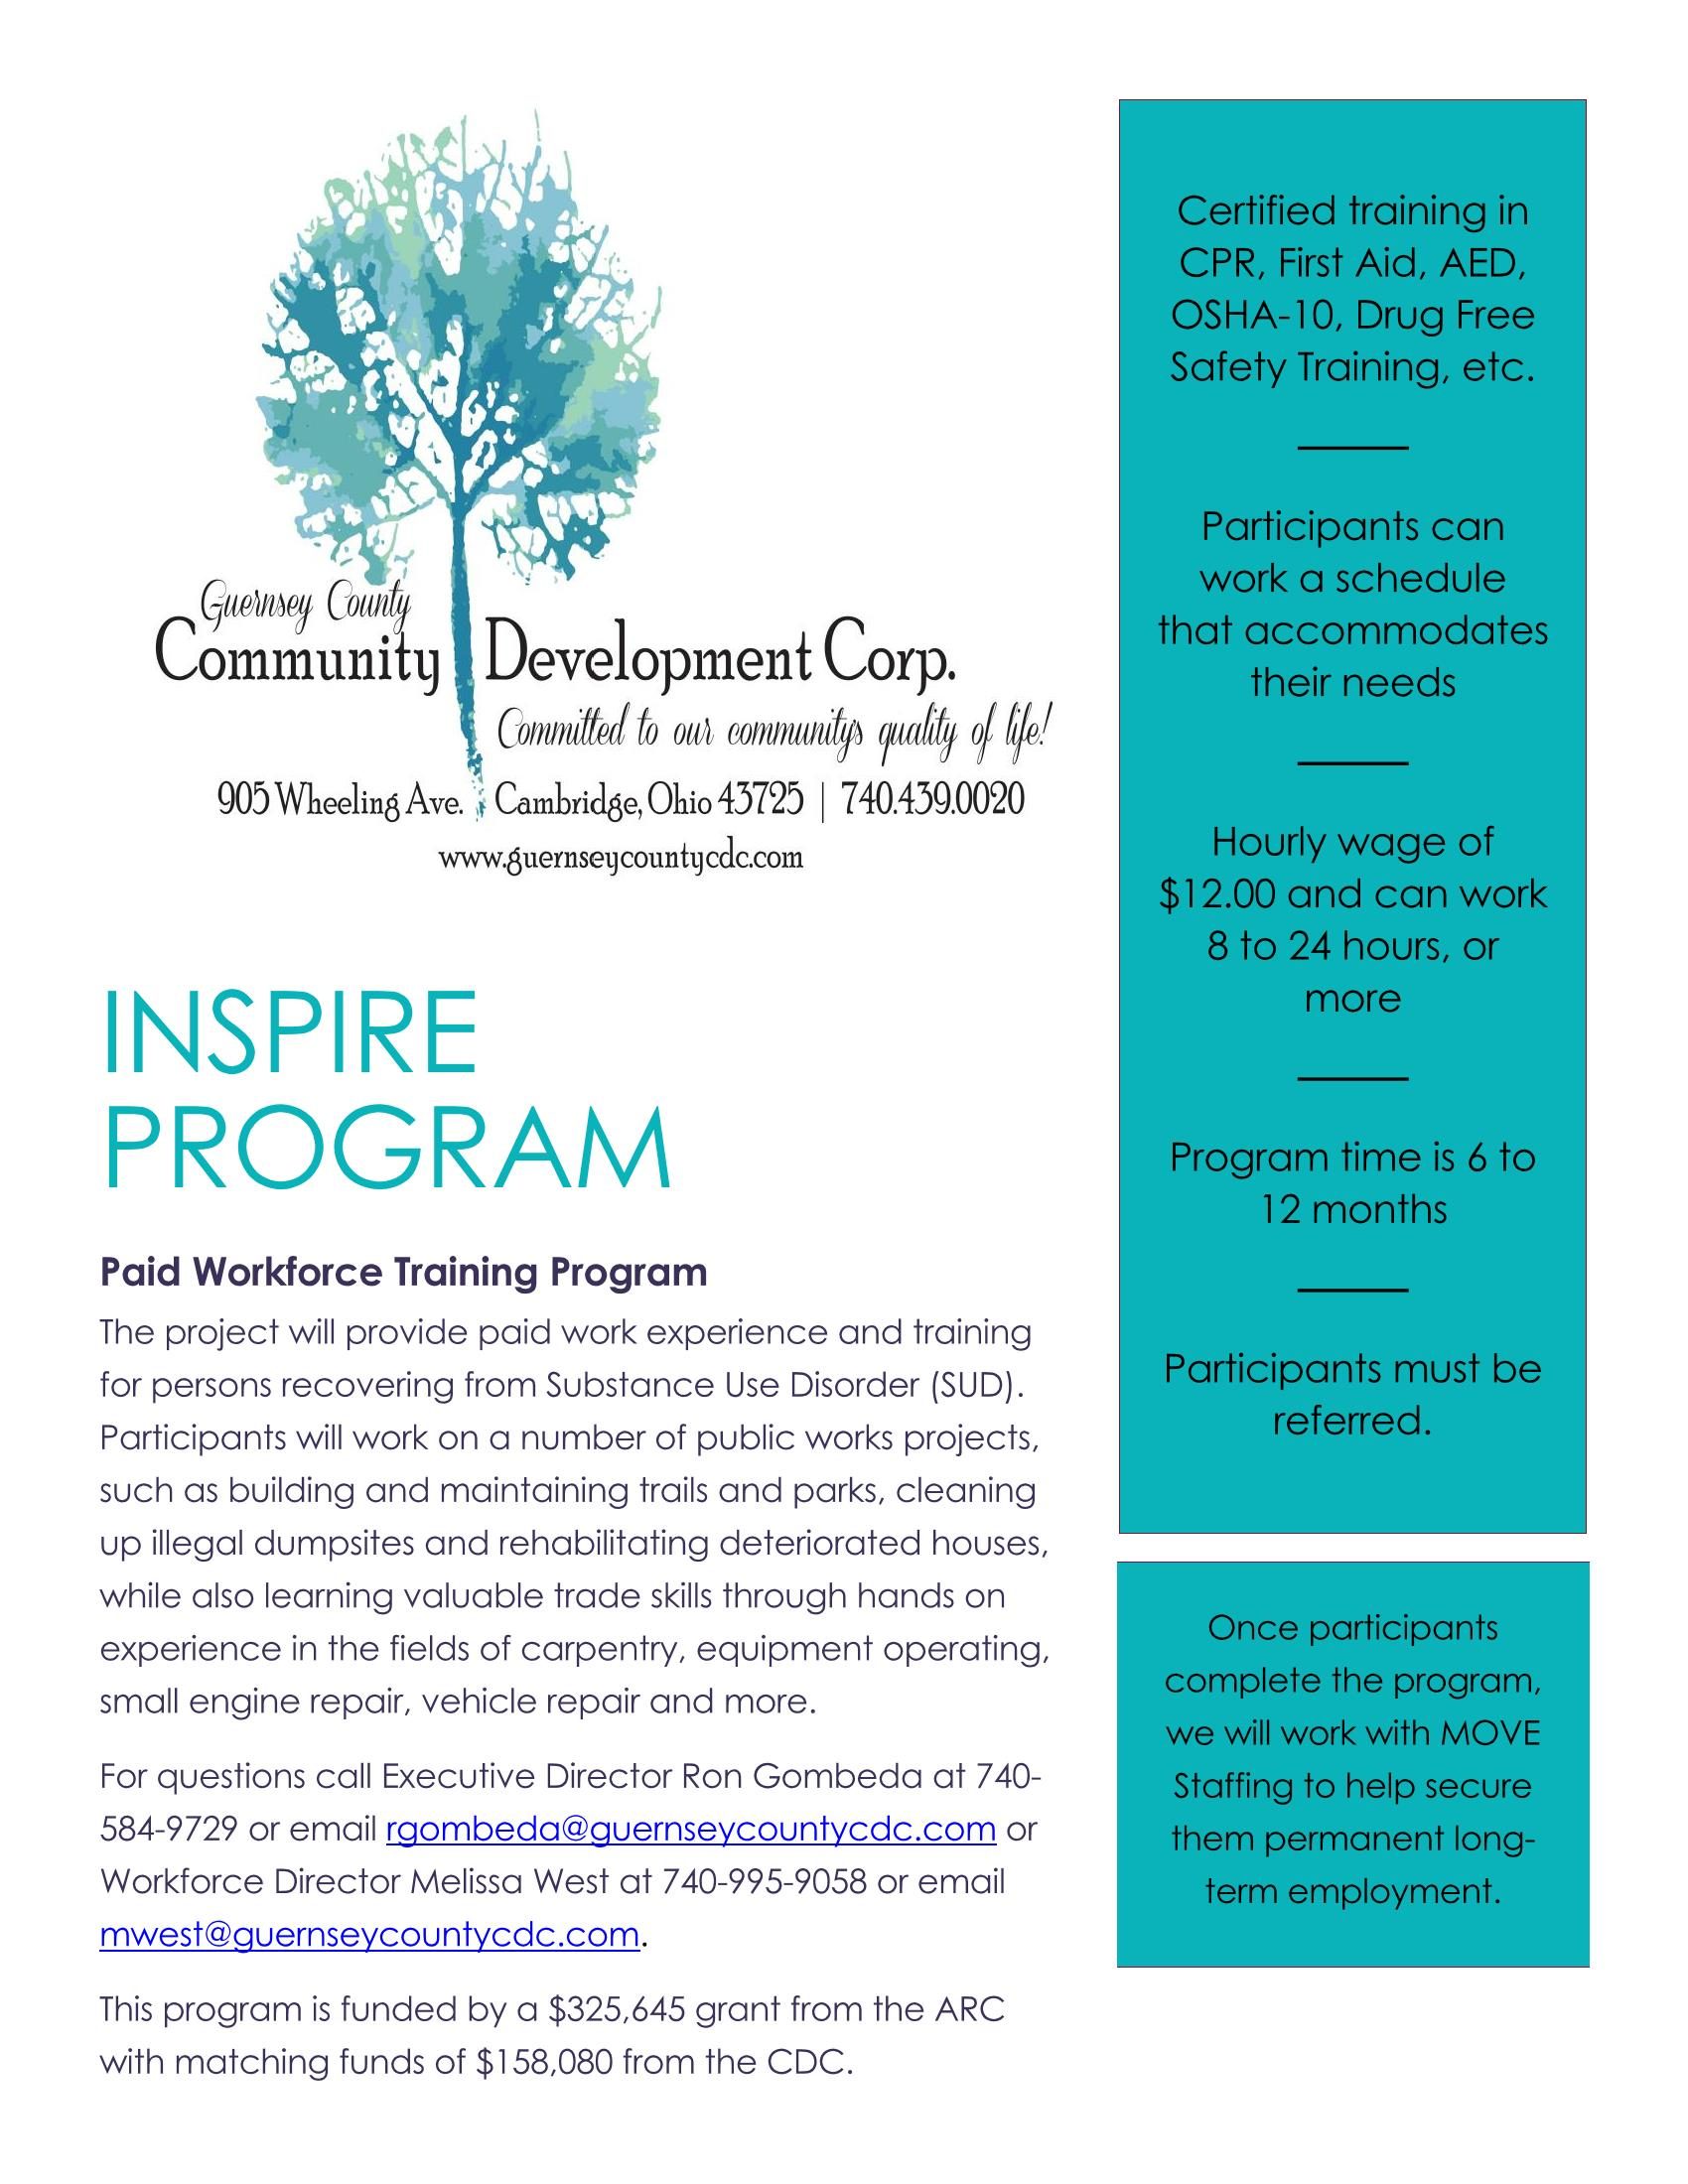 INSPIRE Grant: Guernsey County Recovery to Workforce Development Project